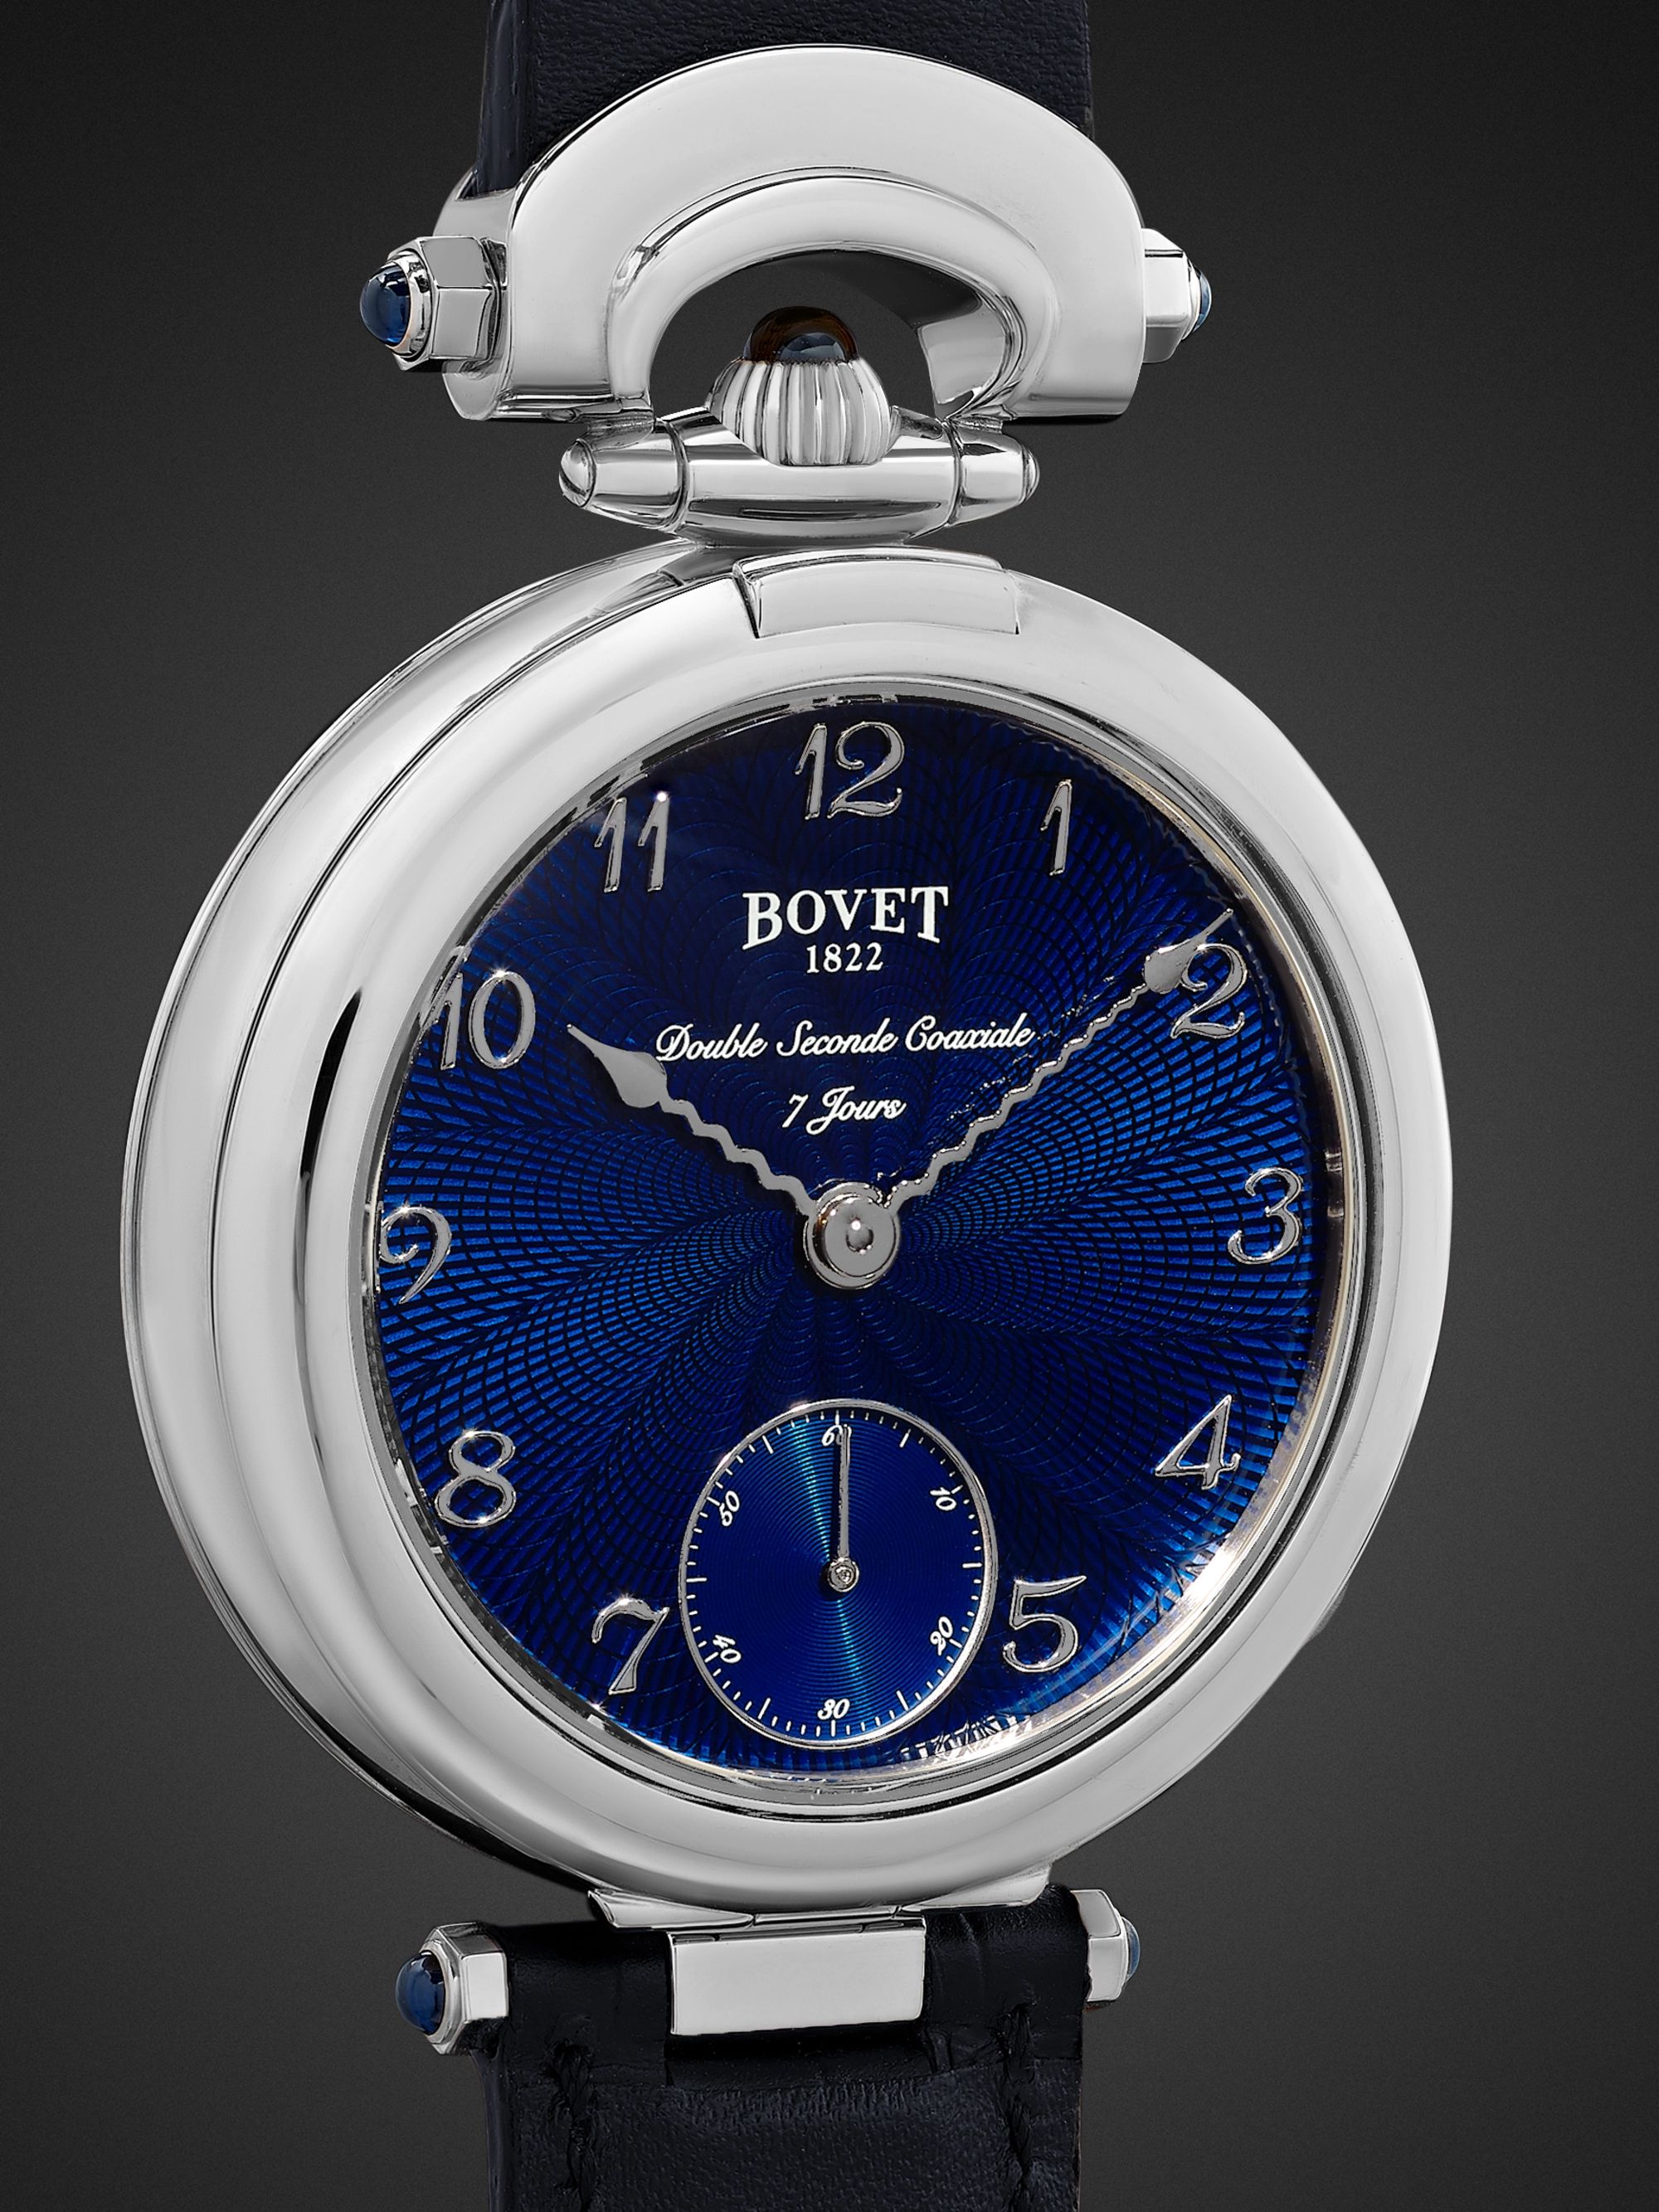 BOVET Monsieur BOVET Hand-Wound 43mm 18-Karat White Gold and Leather Watch, Ref. No. AI43018